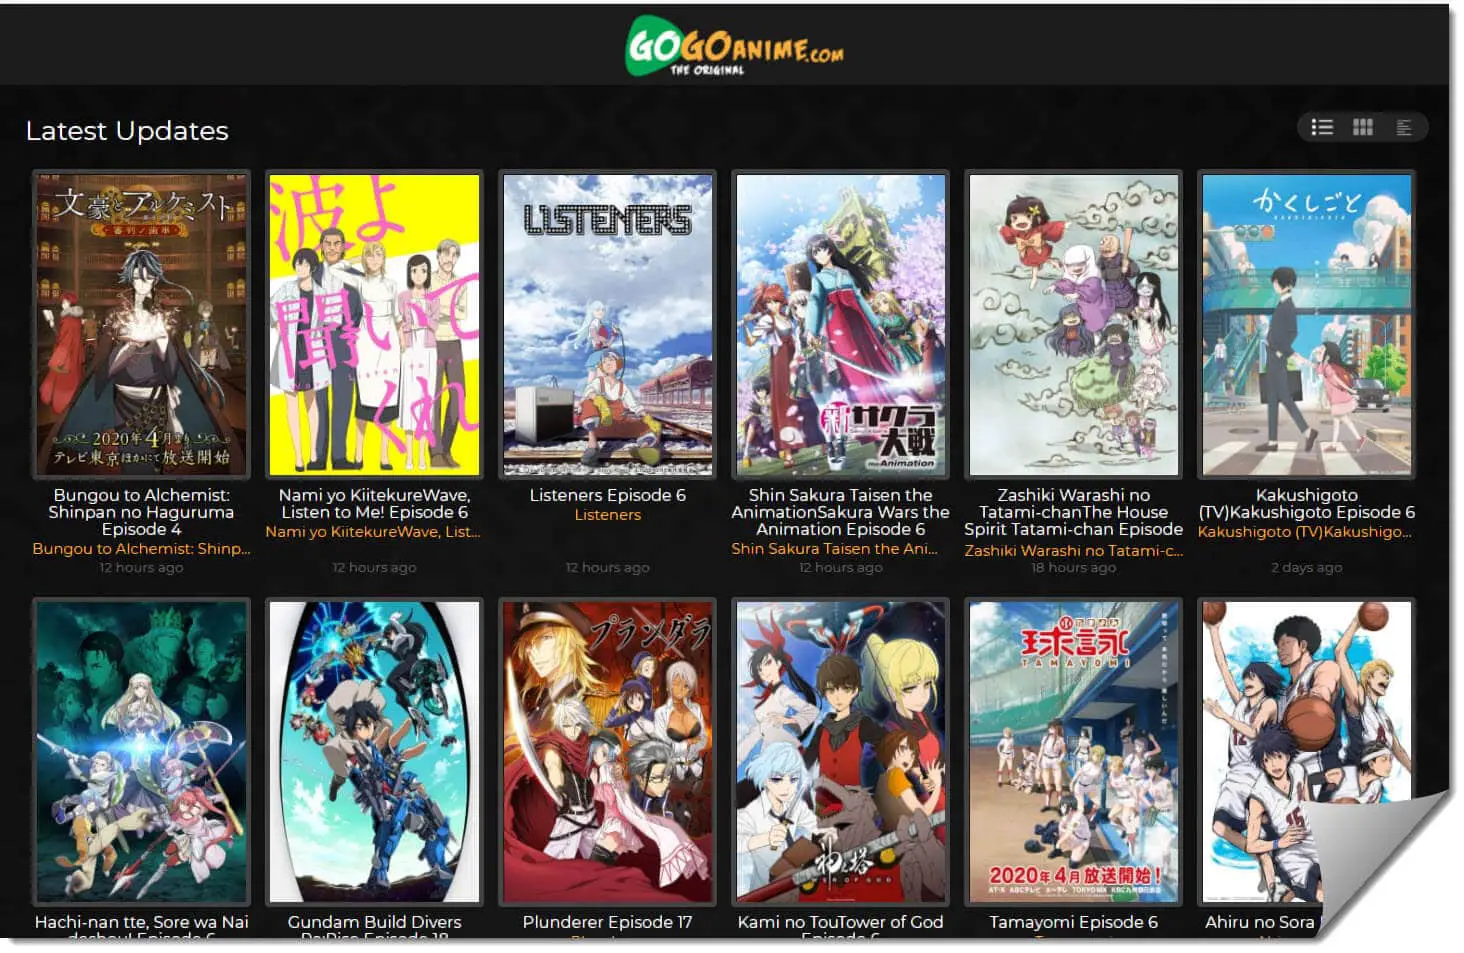 free anime websites without ads or popups